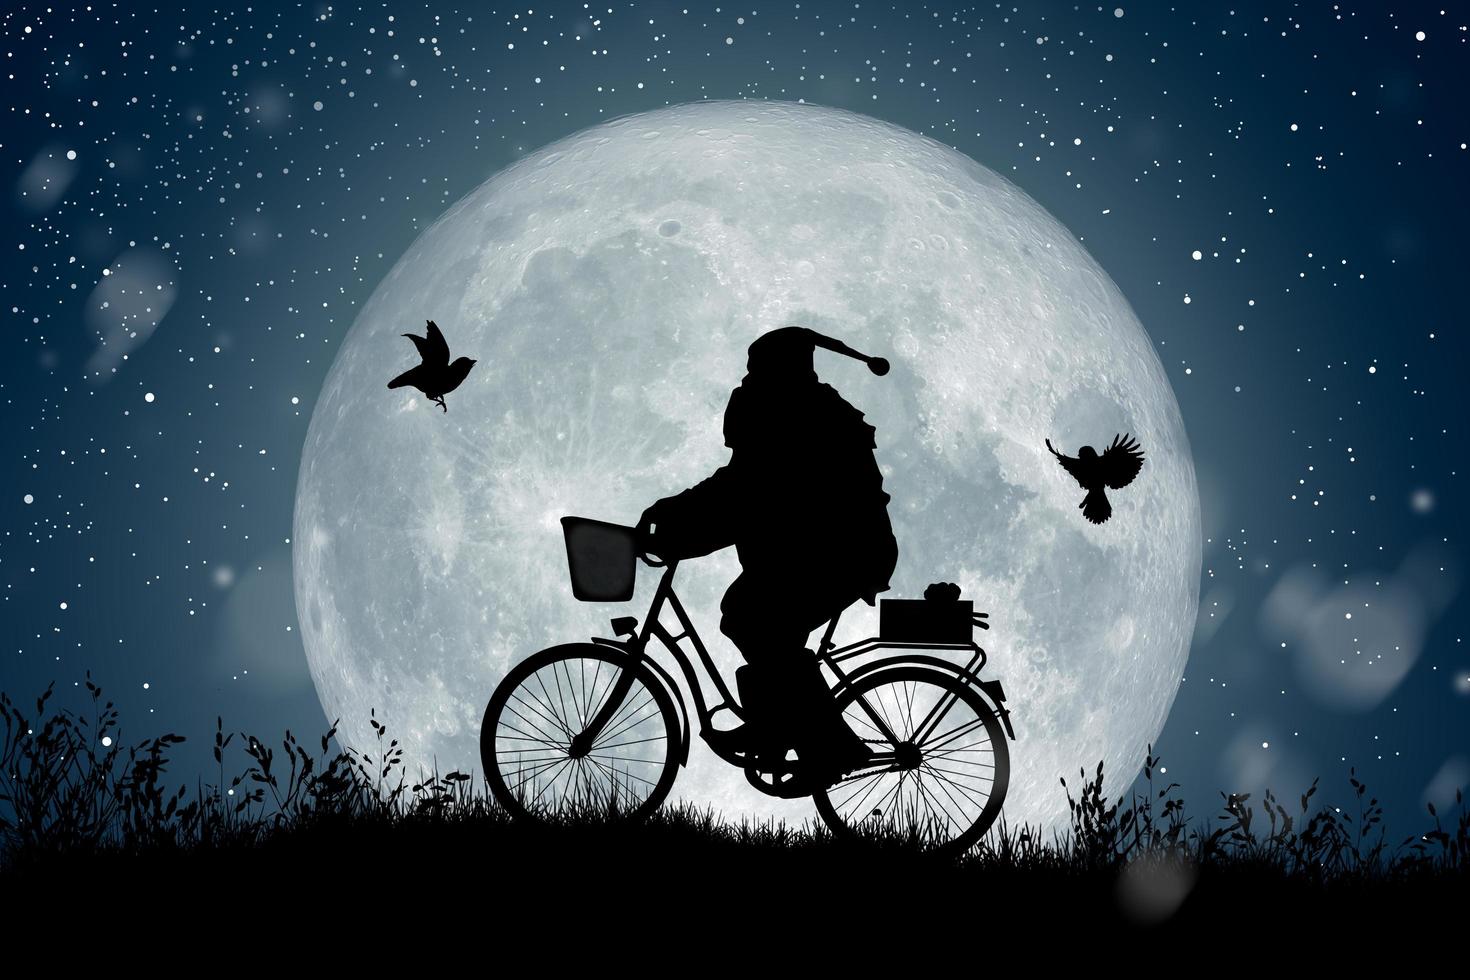 Silhouette of Santa Claus riding on his bicycle over the full moon. photo